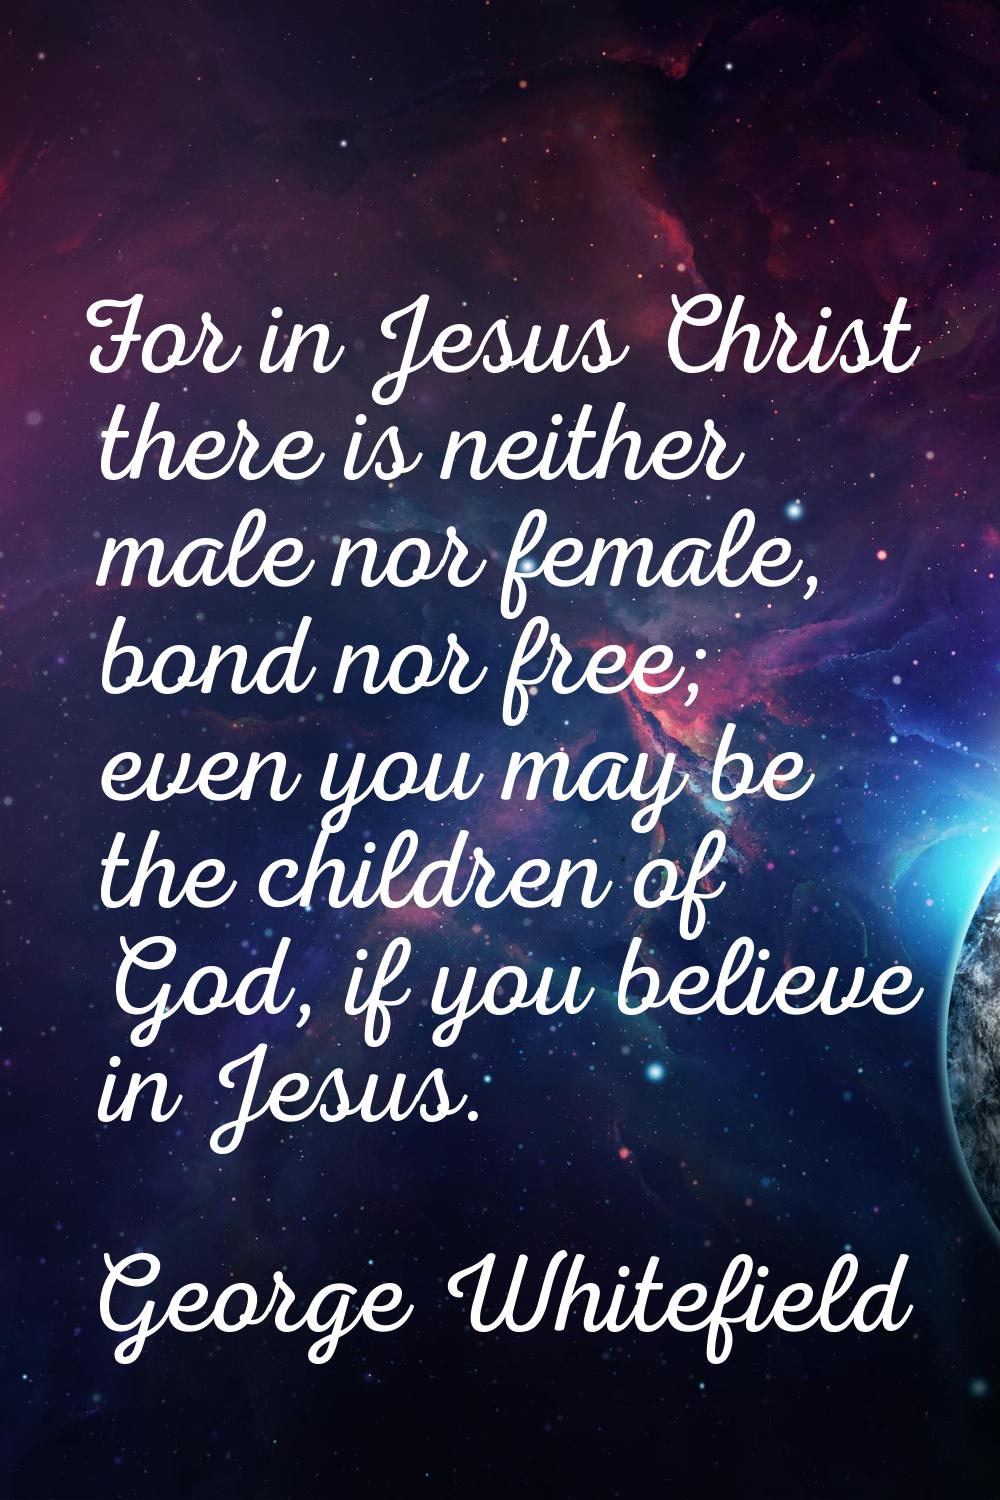 For in Jesus Christ there is neither male nor female, bond nor free; even you may be the children o